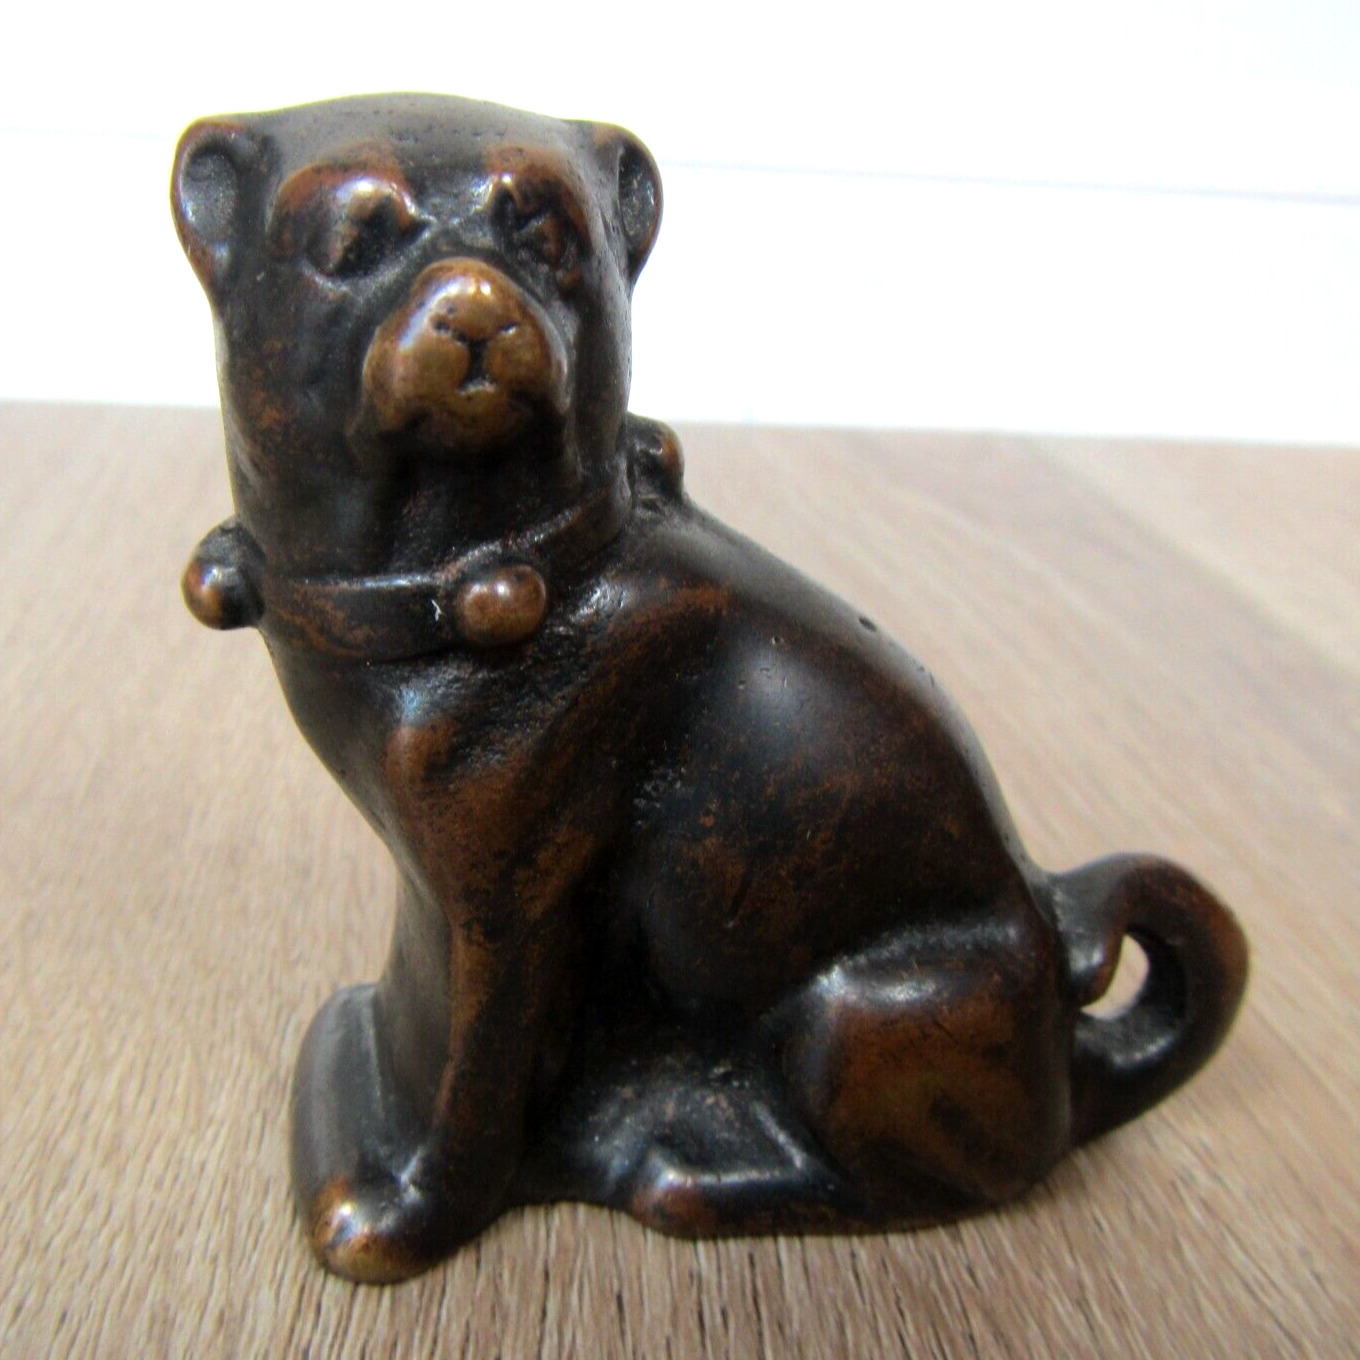 VINTAGE ANTIQUE SOLID BRONZE SMALL DOG WITH COLLAR FIGURE PUG PUPPY BULLDOG ?